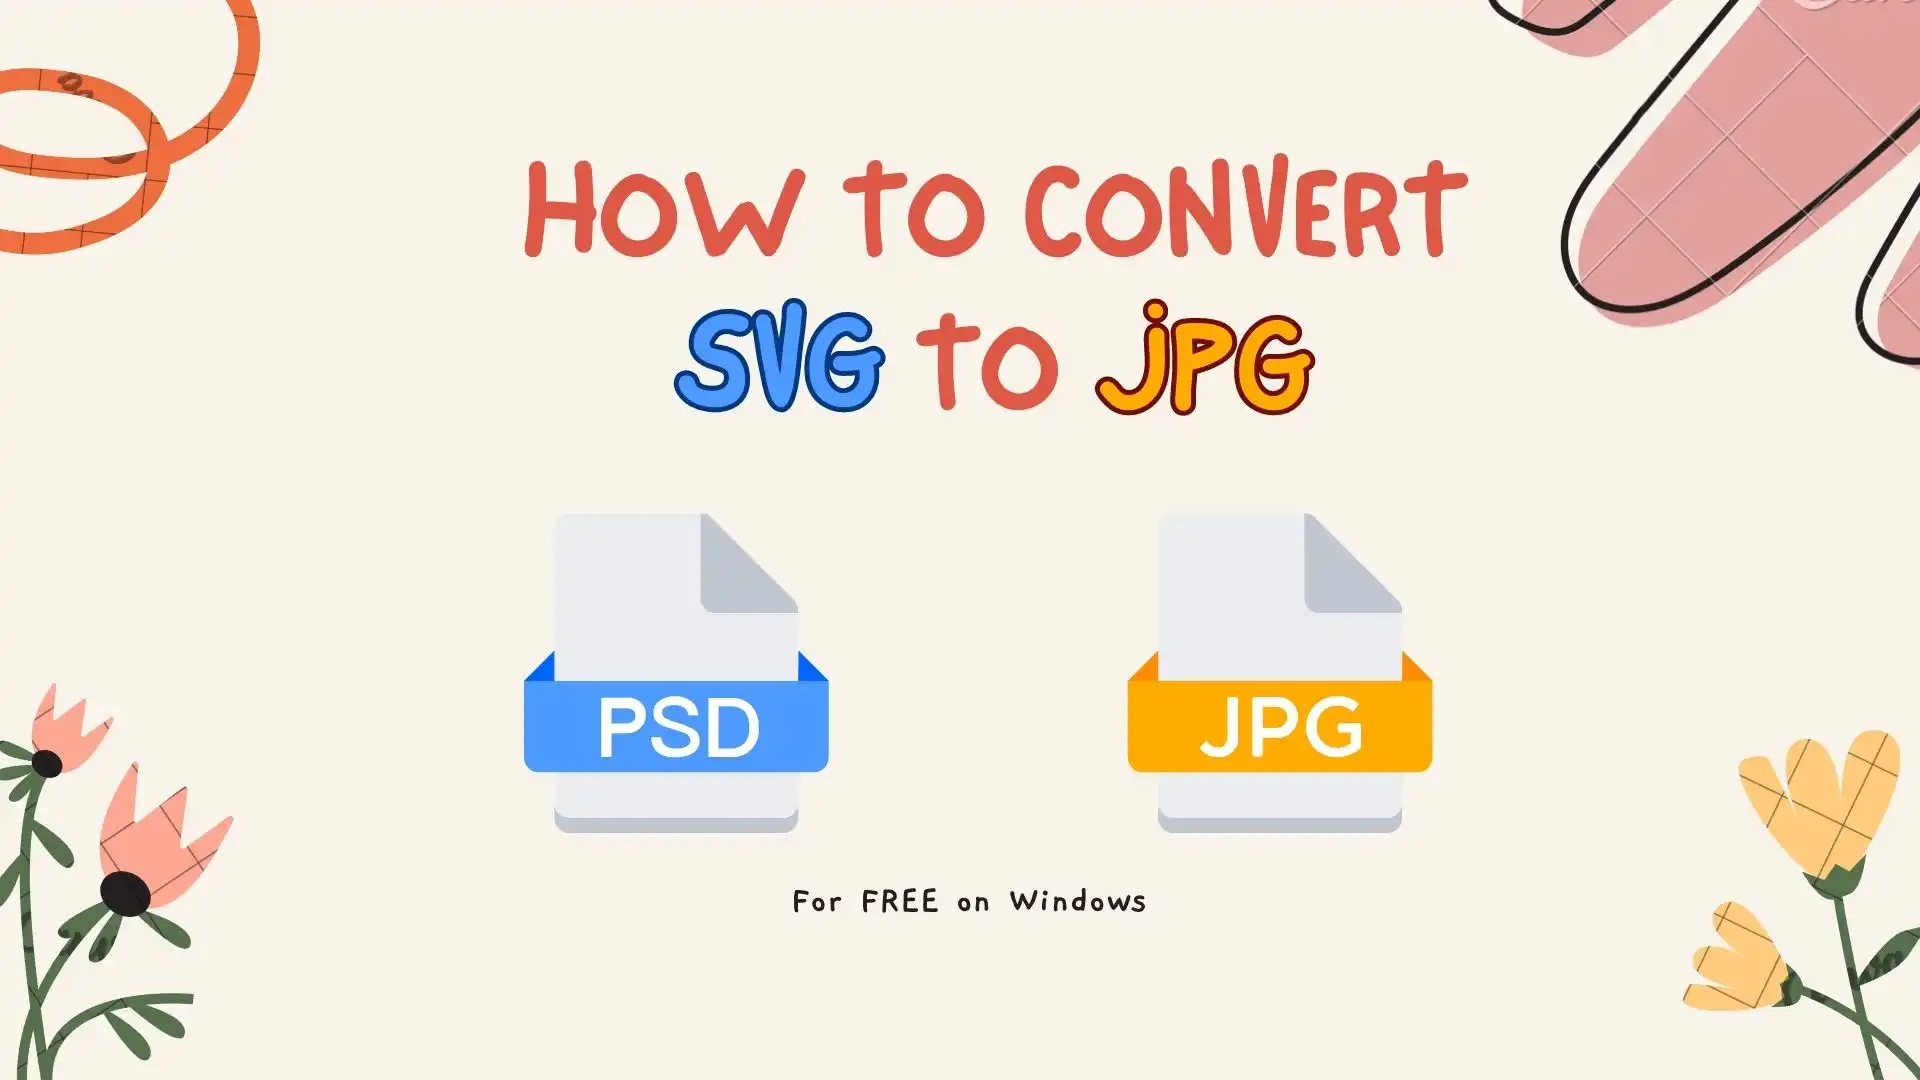 How to Convert PSD to JPG for FREE on Windows